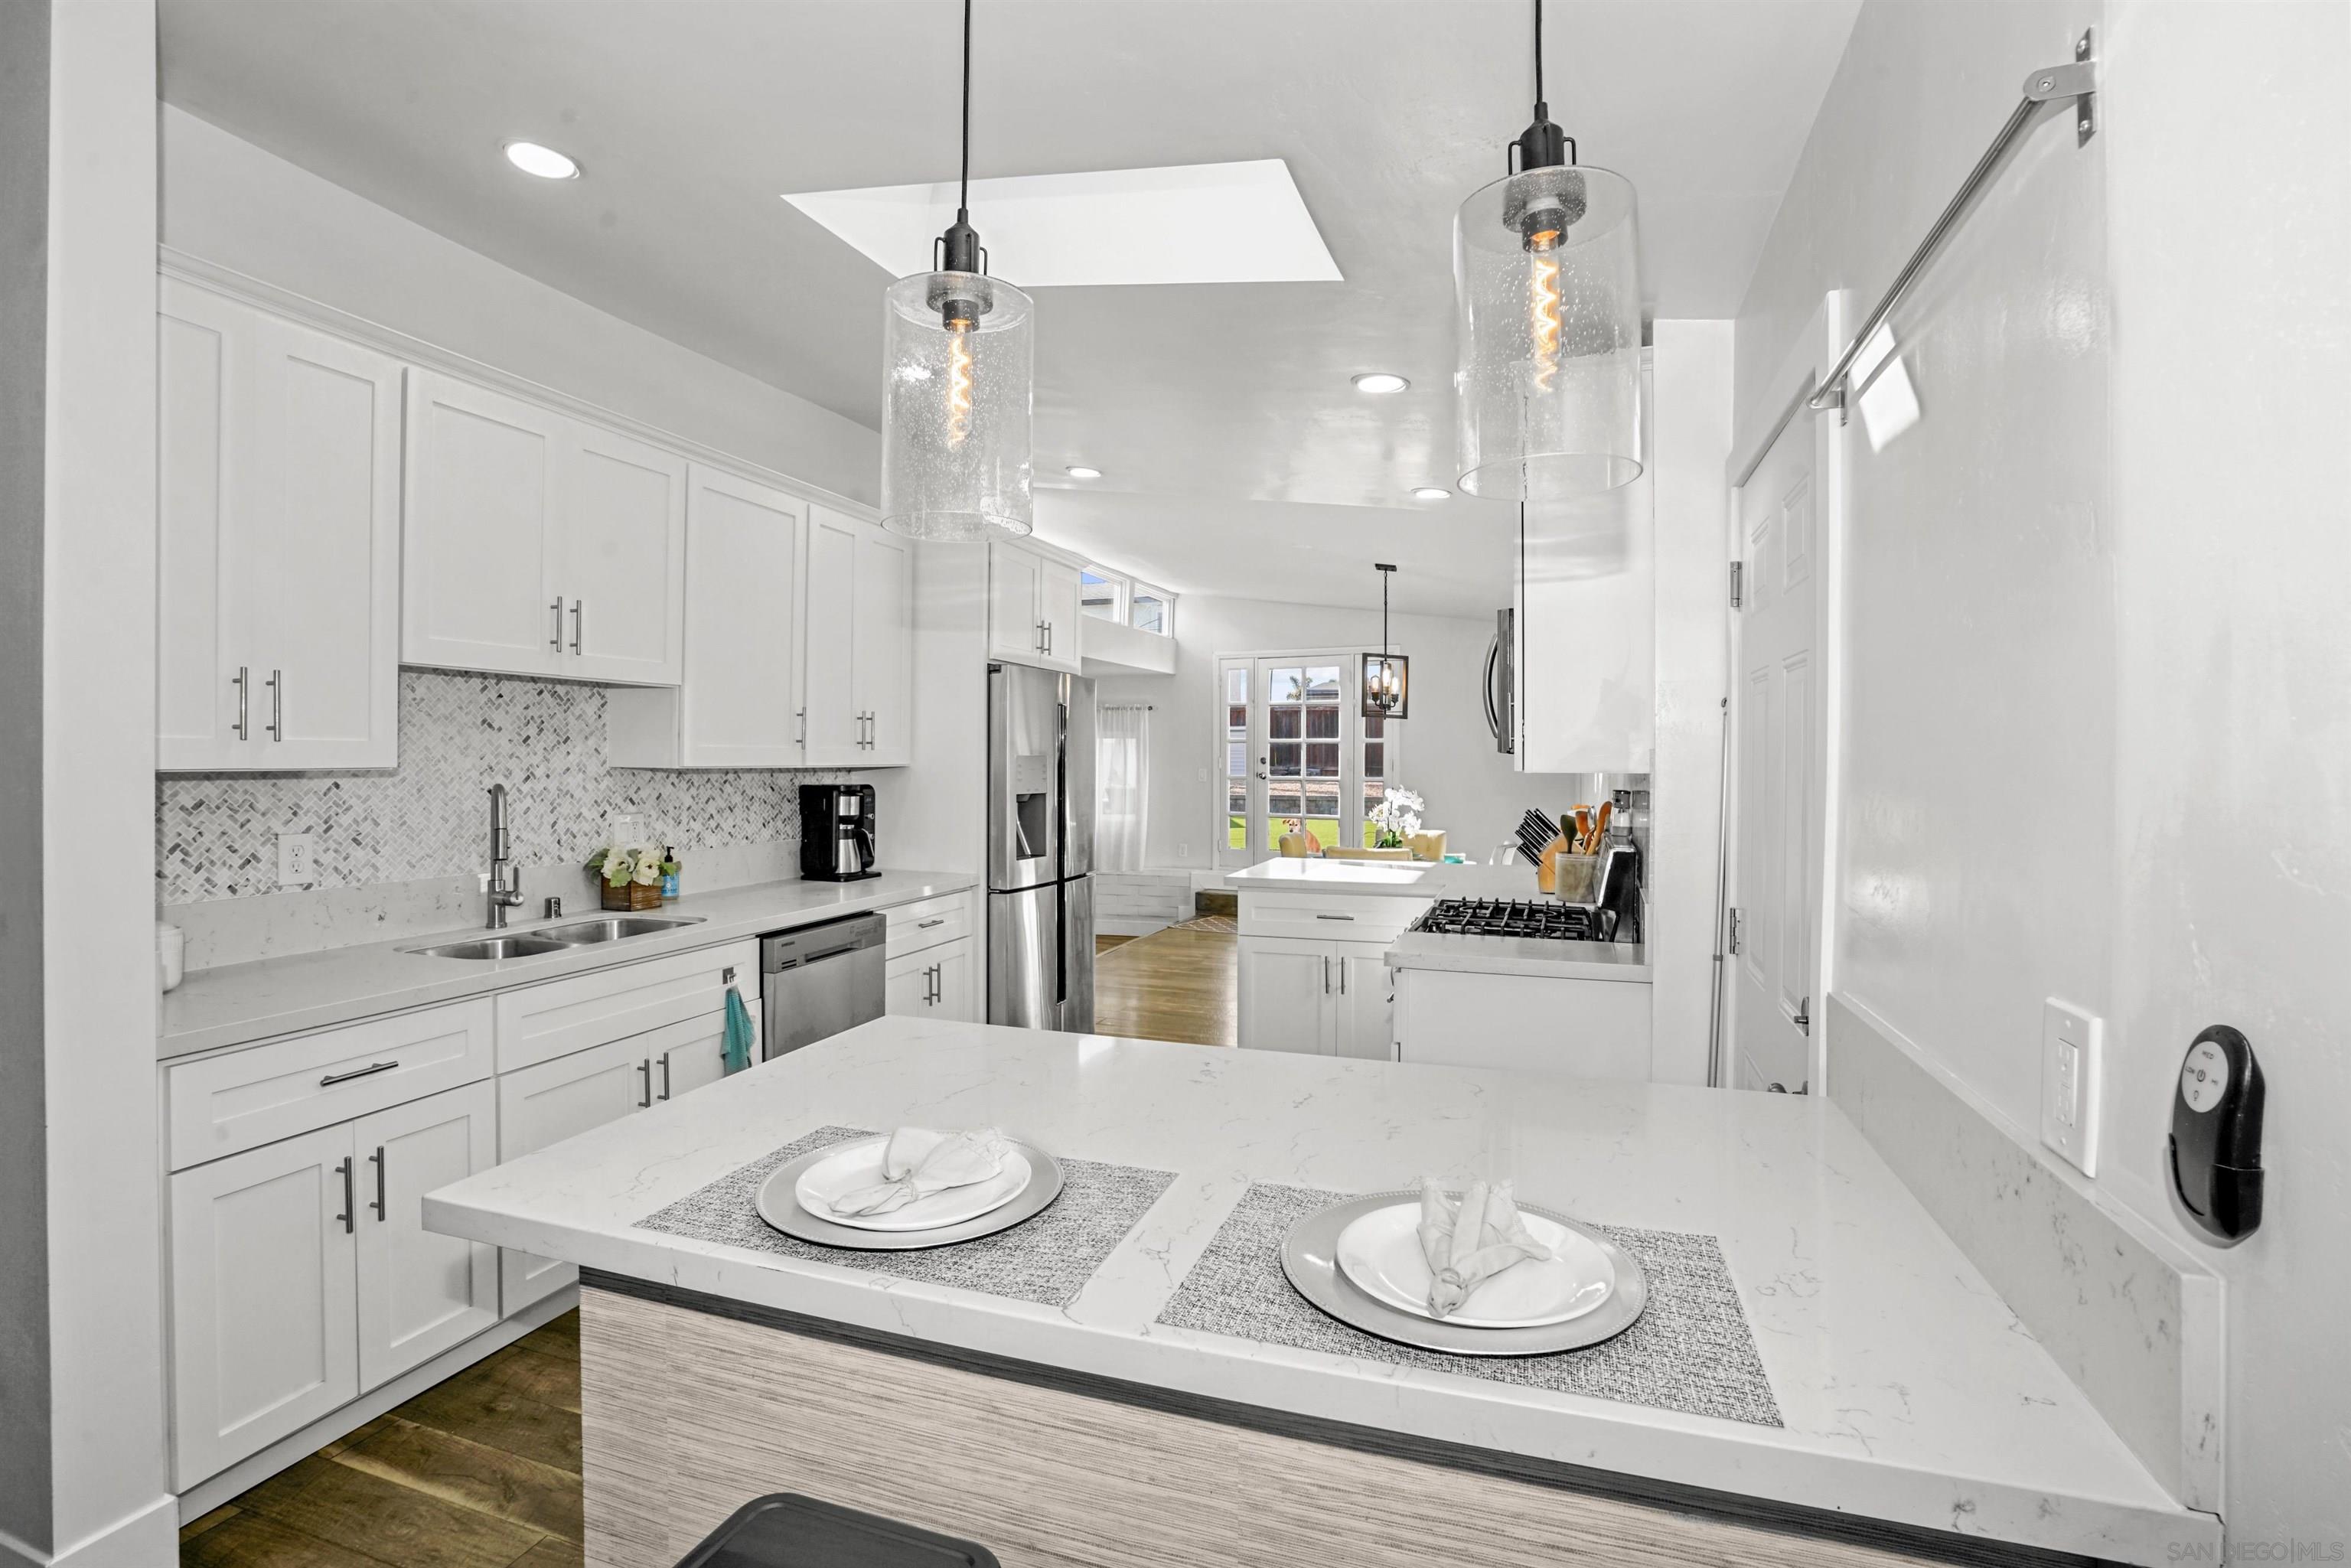 a kitchen with stainless steel appliances kitchen island granite countertop a table chairs and white cabinets